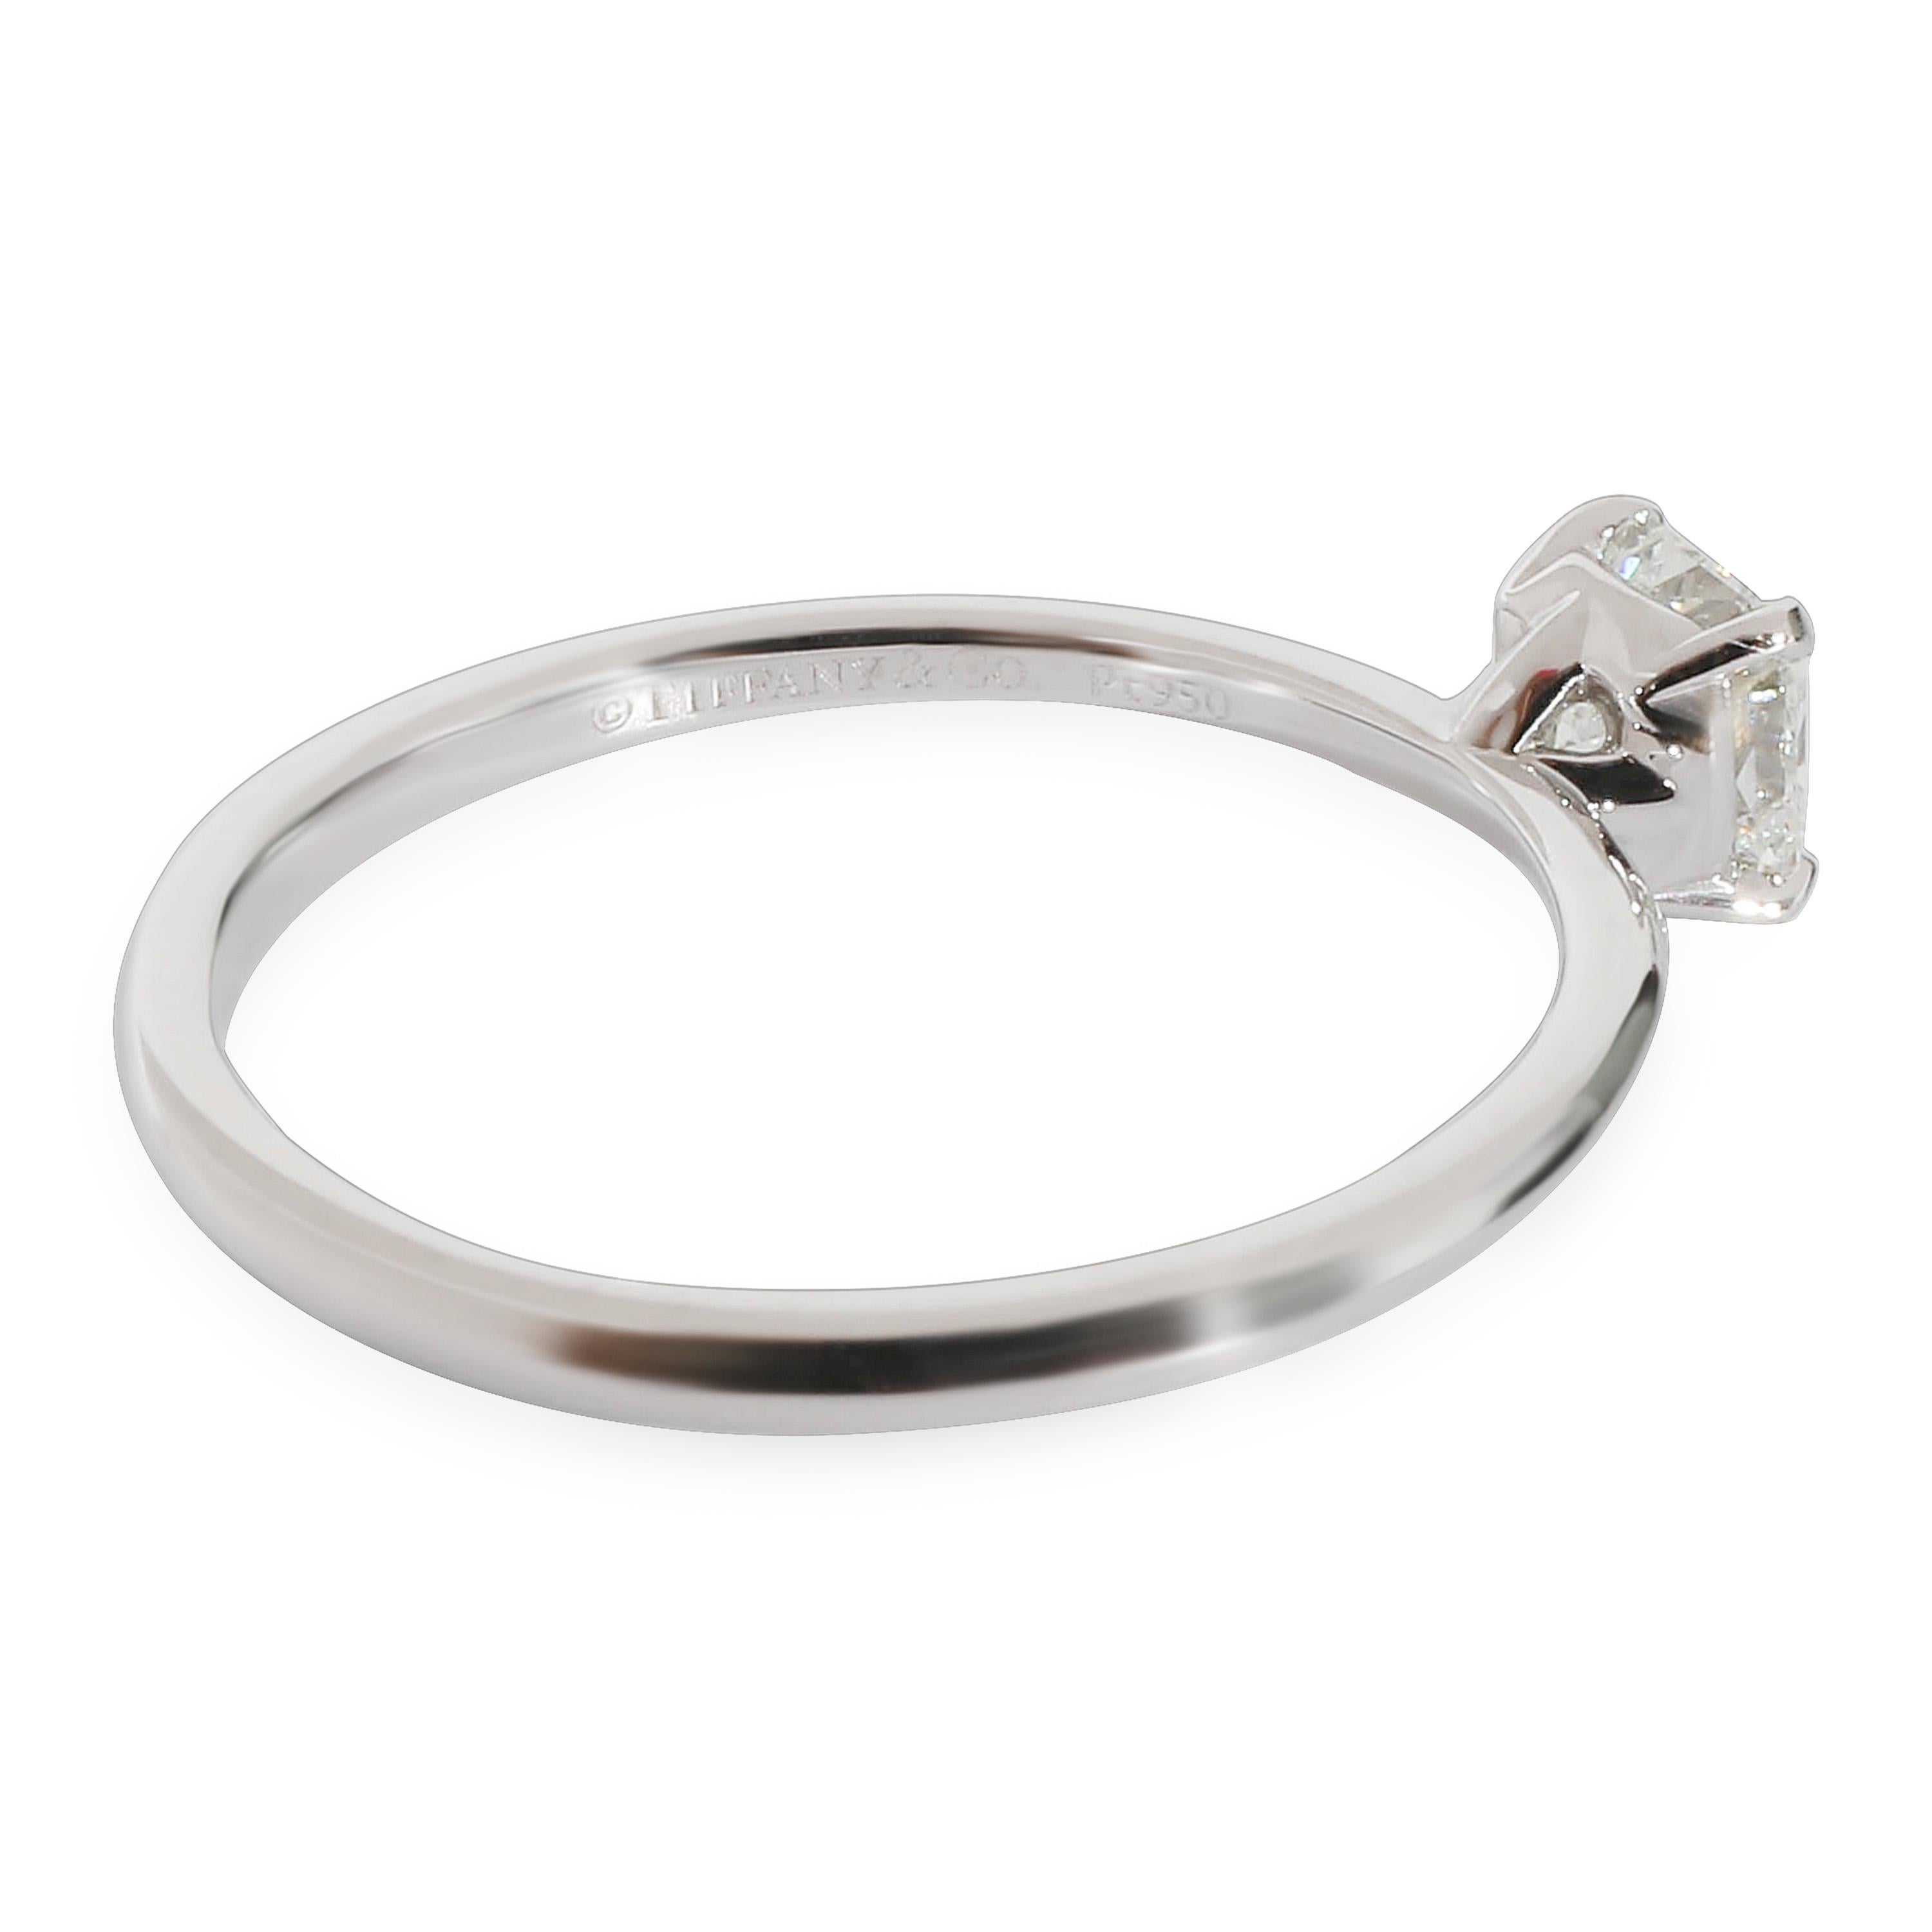 Tiffany & Co. Solitaire Engagement Ring in Platinum H VS1 0.54 CTW

PRIMARY DETAILS
SKU: 132534
Listing Title: Tiffany & Co. Solitaire Engagement Ring in Platinum H VS1 0.54 CTW
Condition Description: Retails for 4850 USD. In excellent condition and